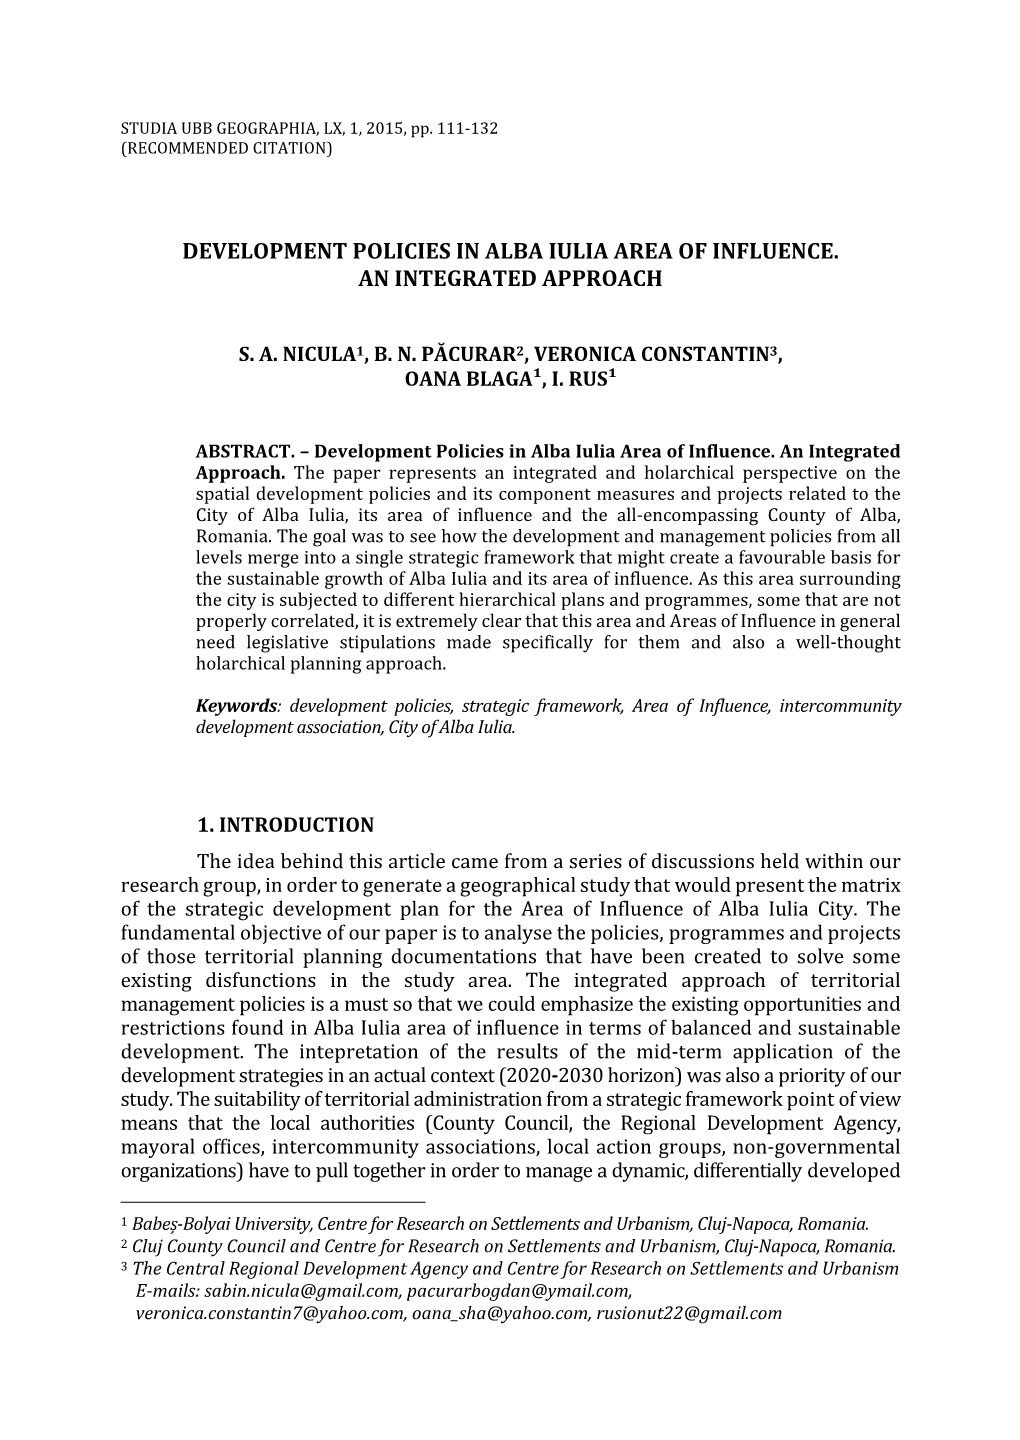 Development Policies in Alba Iulia Area of Influence. an Integrated Approach